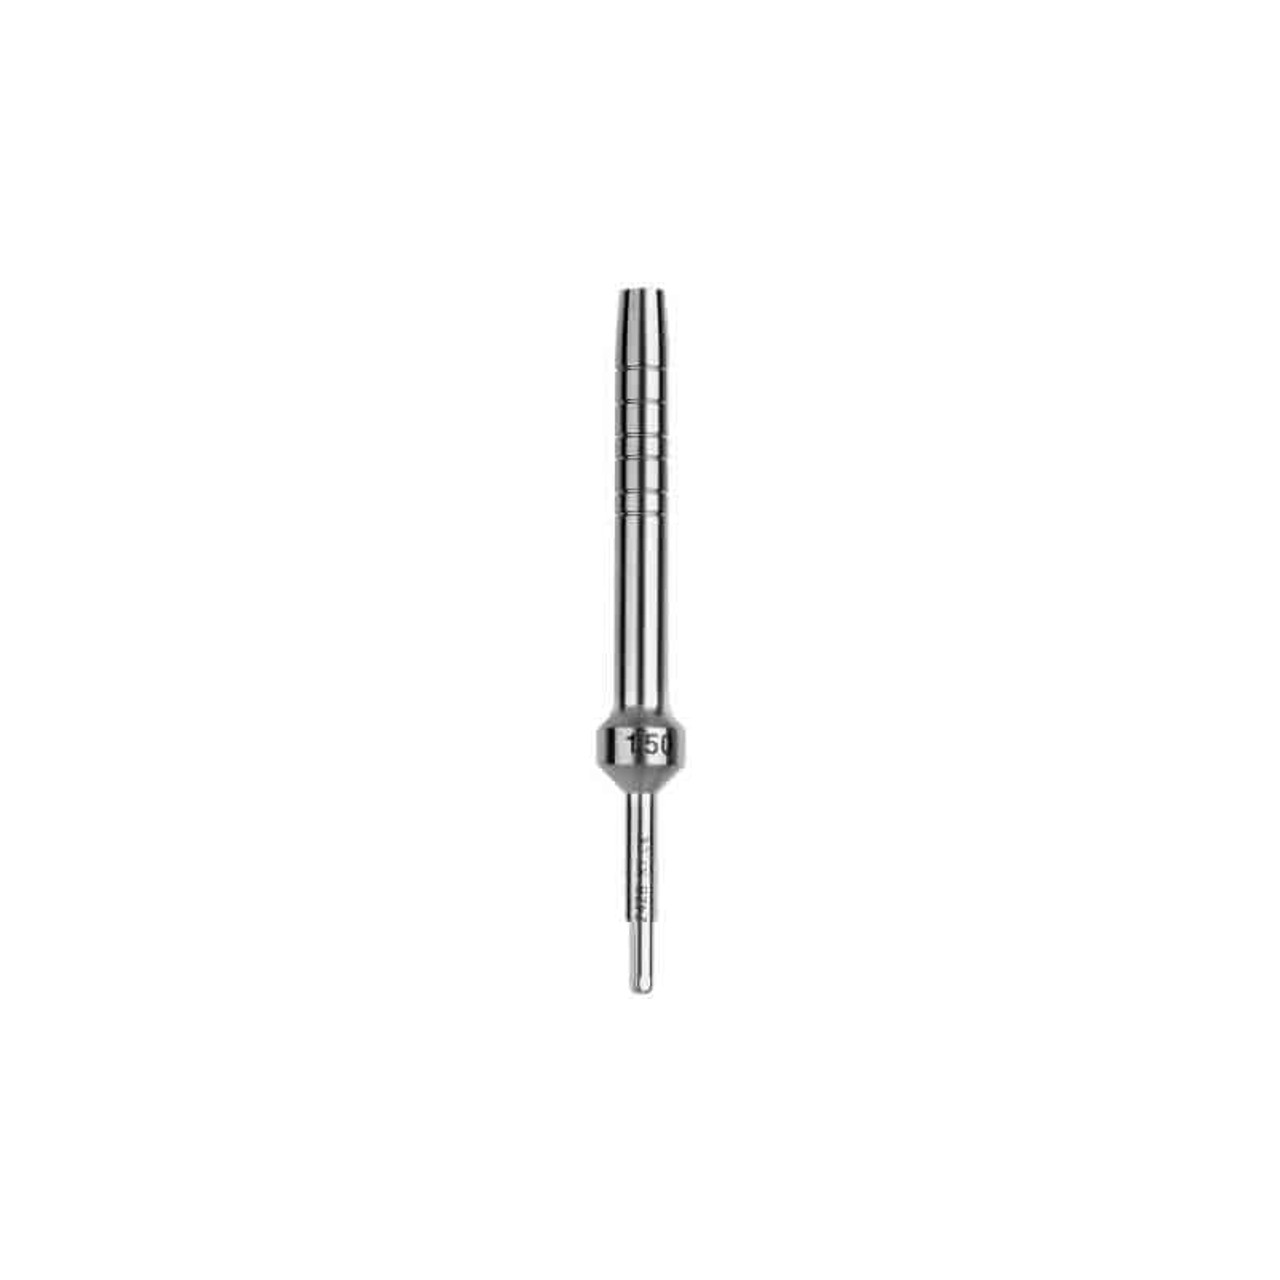 Hu-Friedy - 5.0 mm Osteotome Tapered Concave - Straight Tip